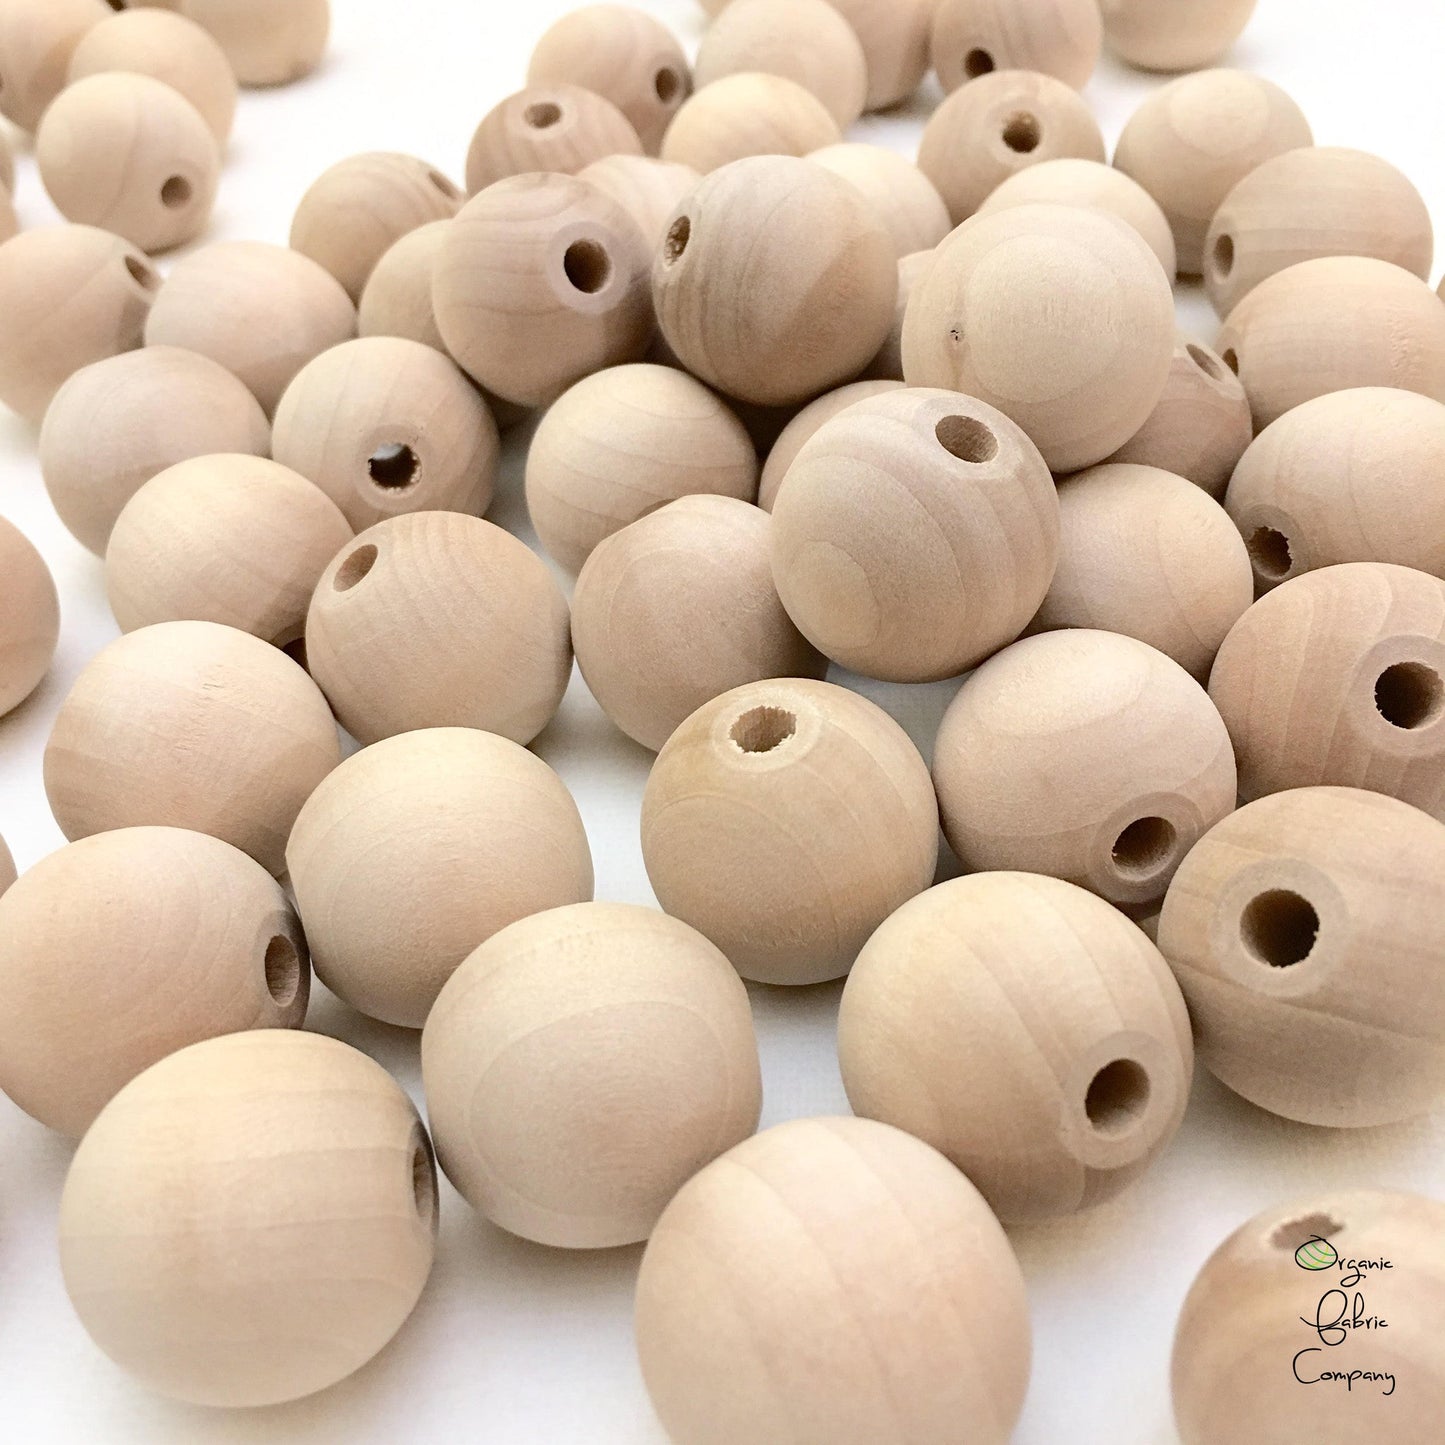 1" Diameter - Natural Maple Wood Smooth Beads - Untreated - Unpolished